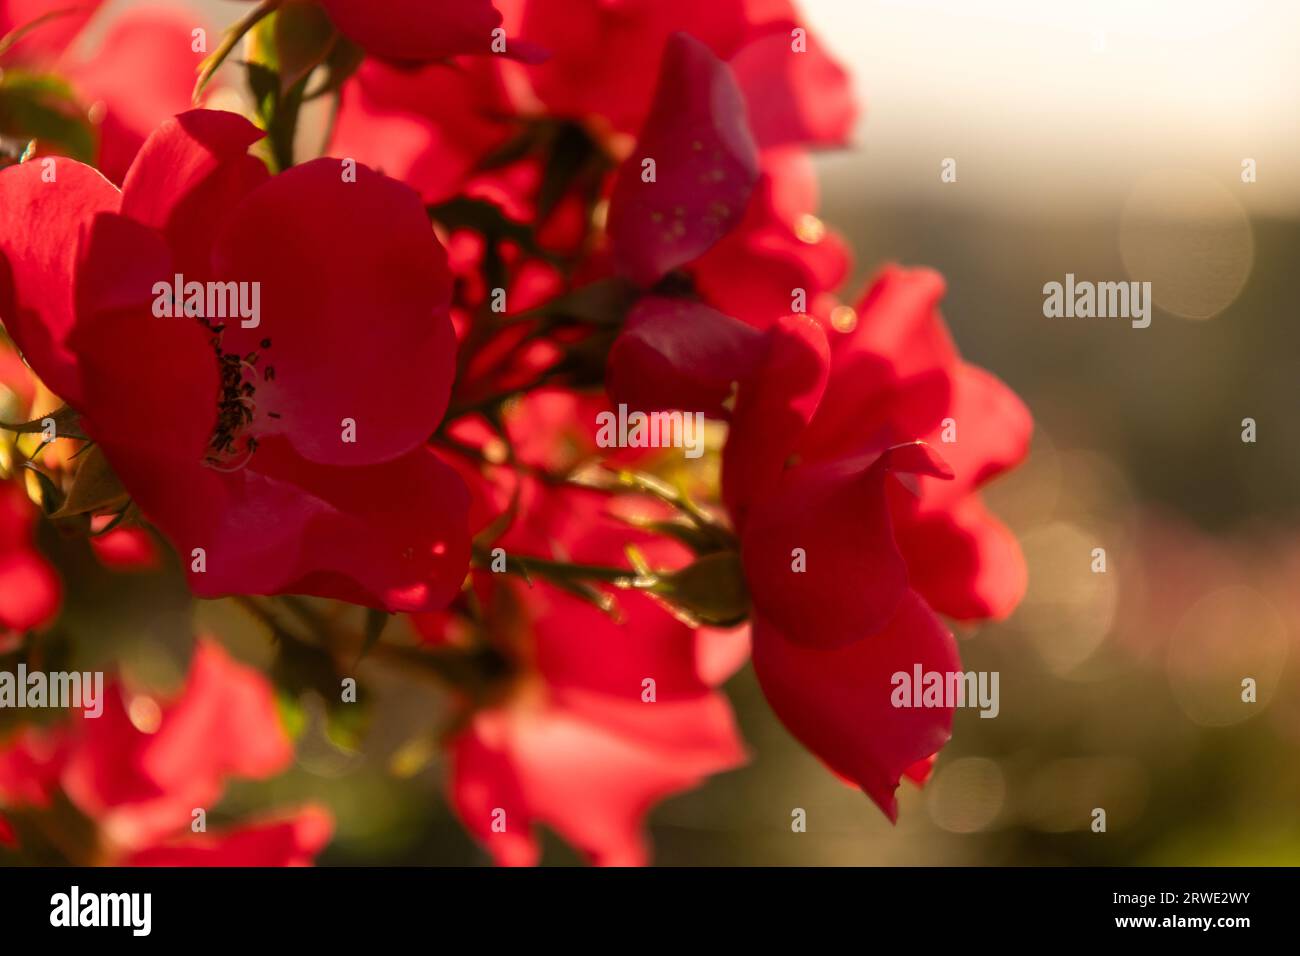 Red flower, blossom in the warm evening light. Close up. Stock Photo